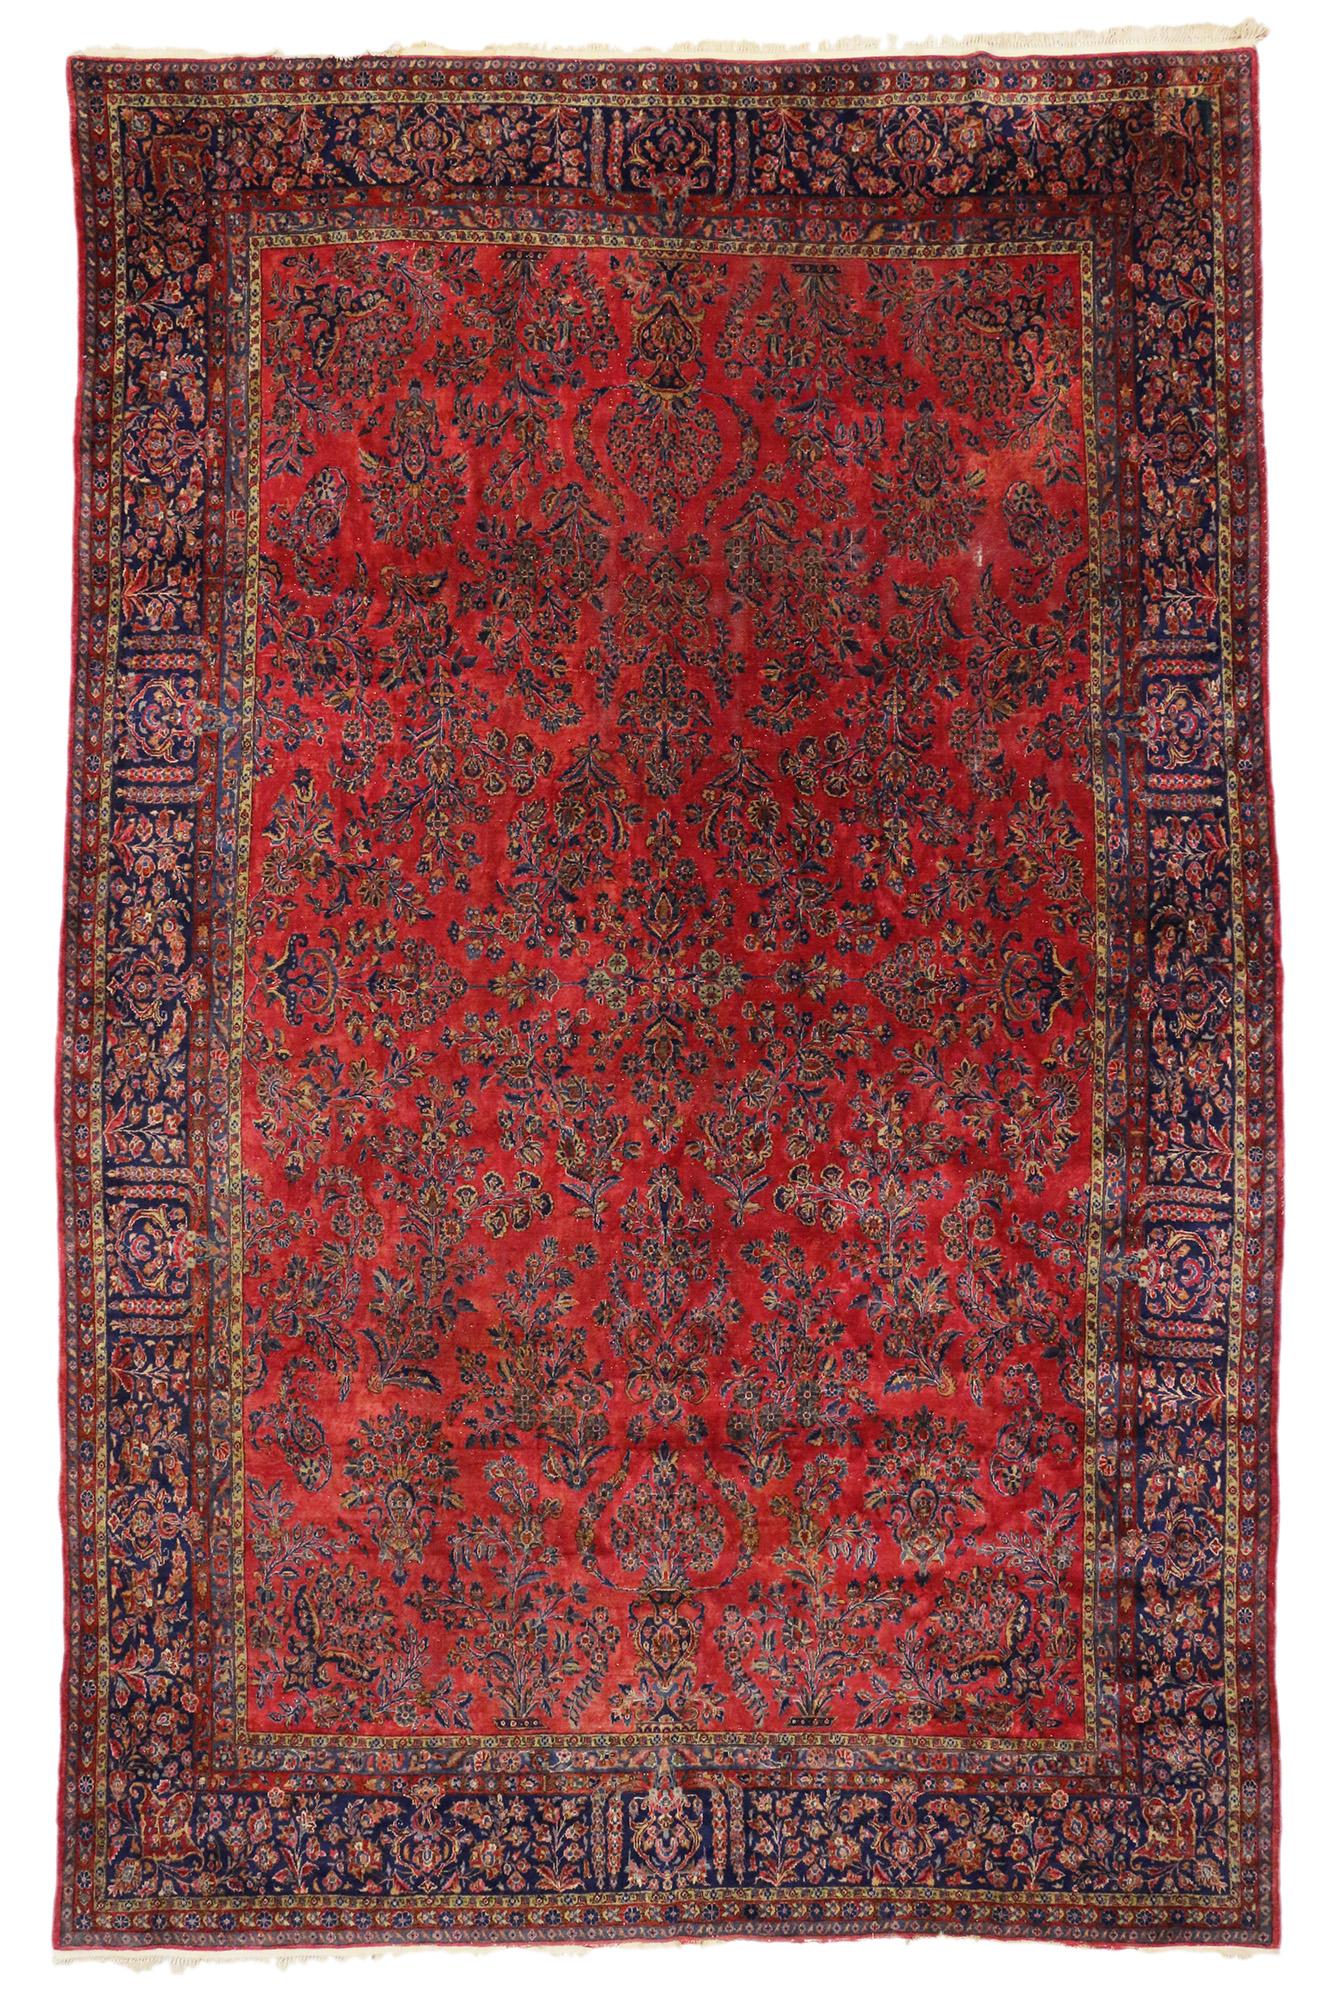 Antique Persian Kashan Rug with Art Nouveau Style in Rich Jewel Tones 8